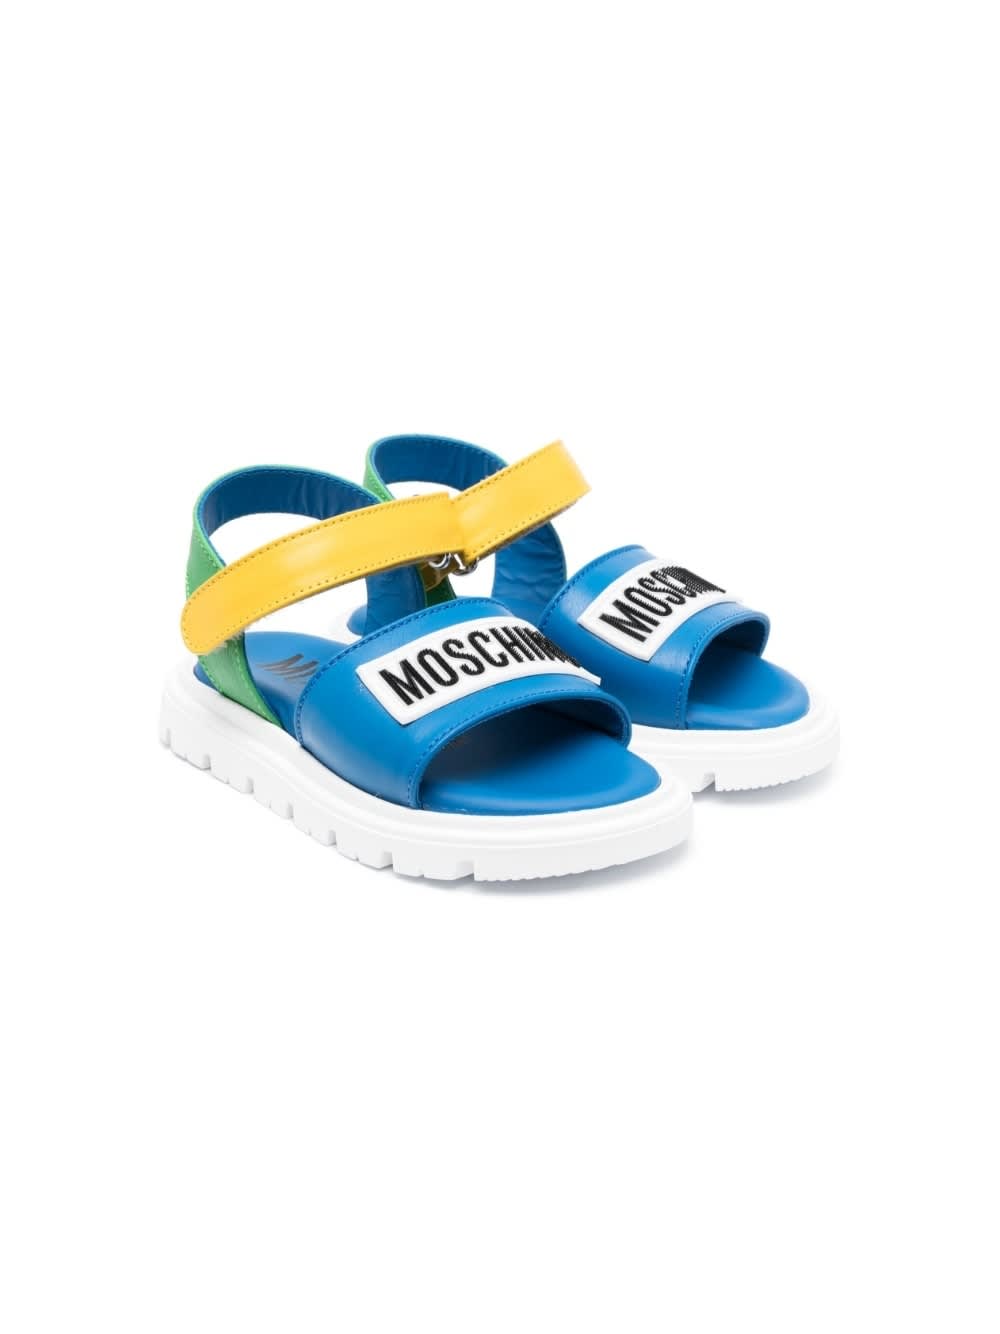 MOSCHINO SANDALS WITH LOGO